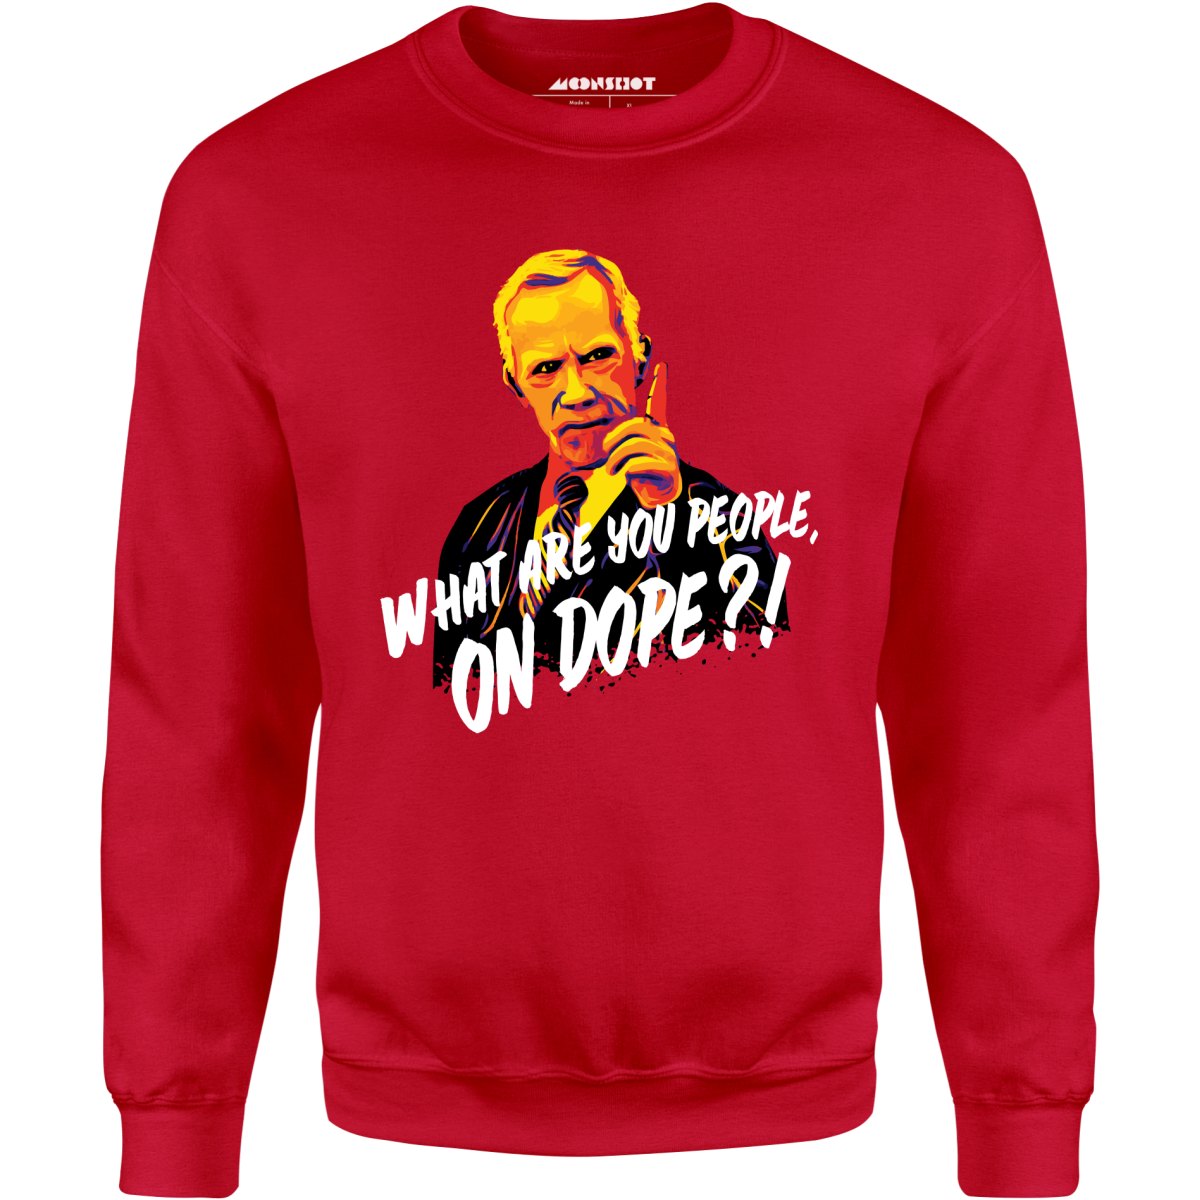 Mr. Hand - What Are You People, On Dope? - Unisex Sweatshirt